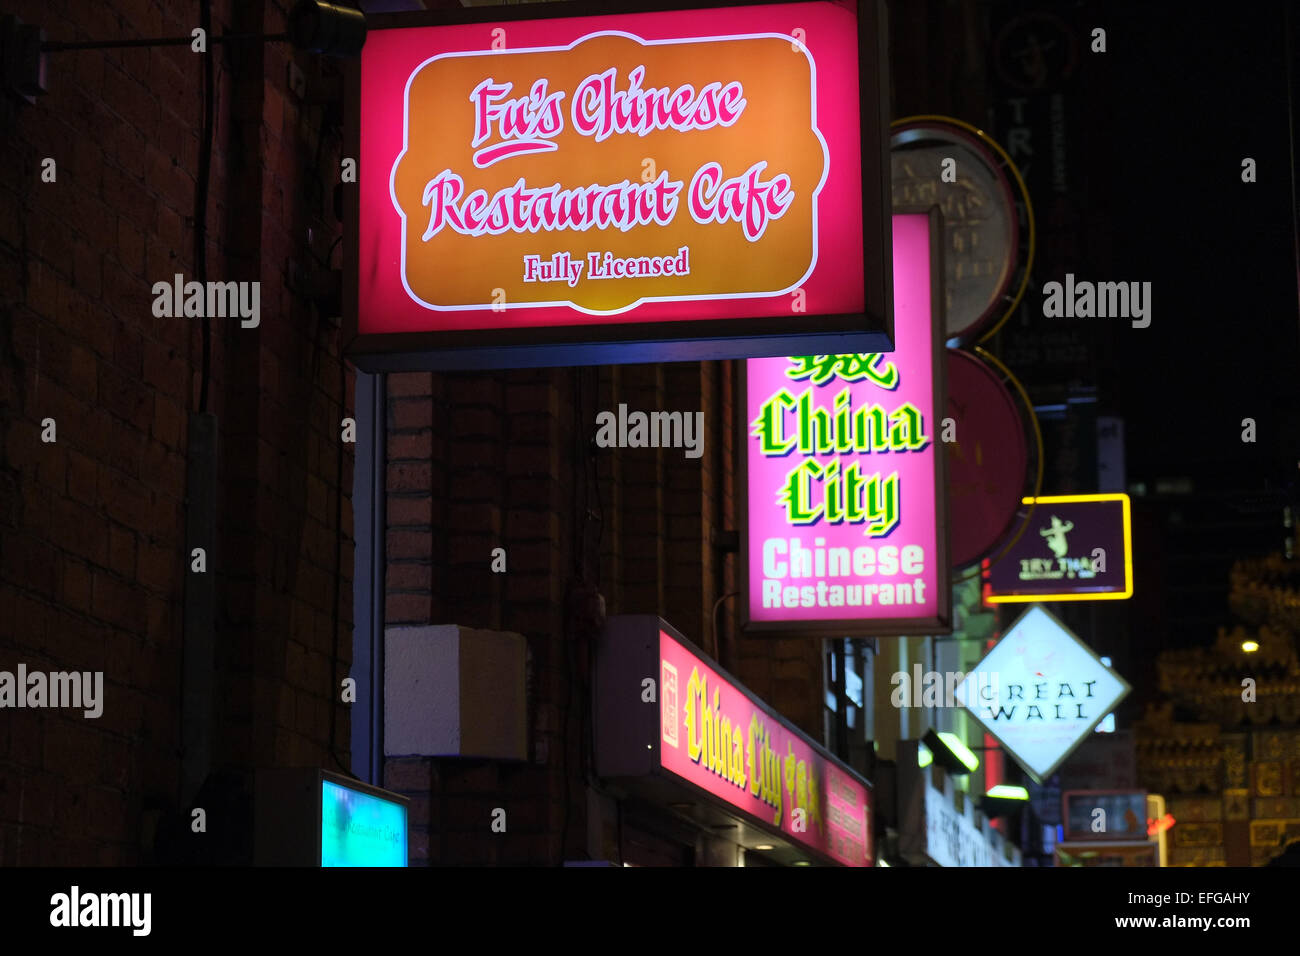 Neon restaurant signs for Chinese restaurants in Chinatown, Manchester. Stock Photo